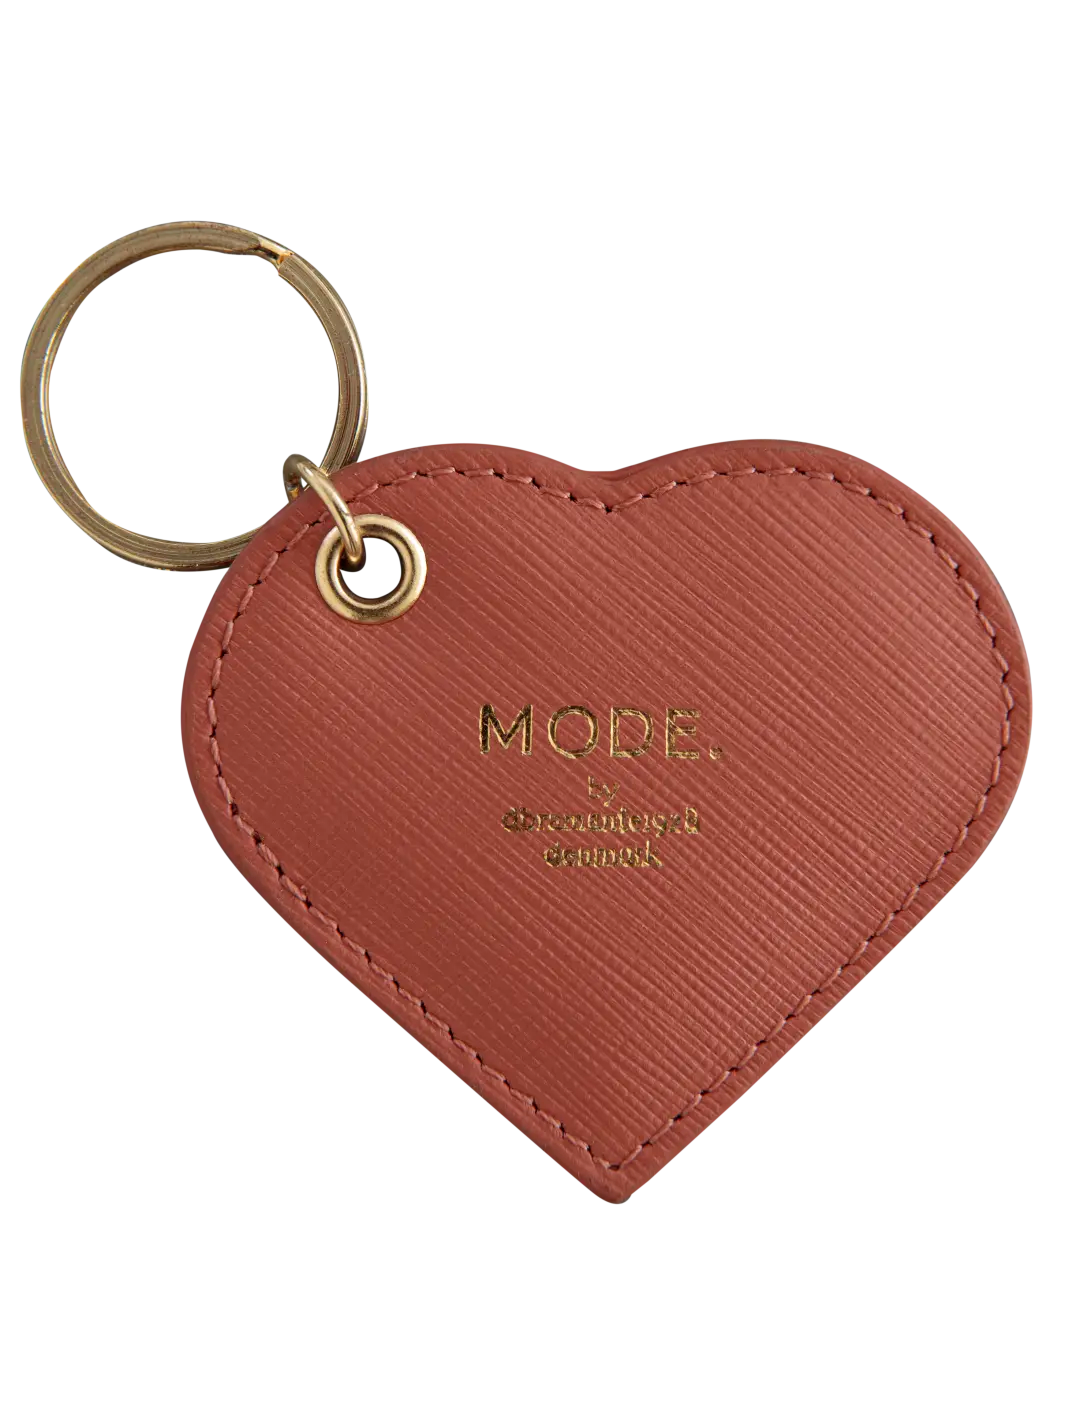 MODE. Heart Key ring - Outlet Rusty Rose